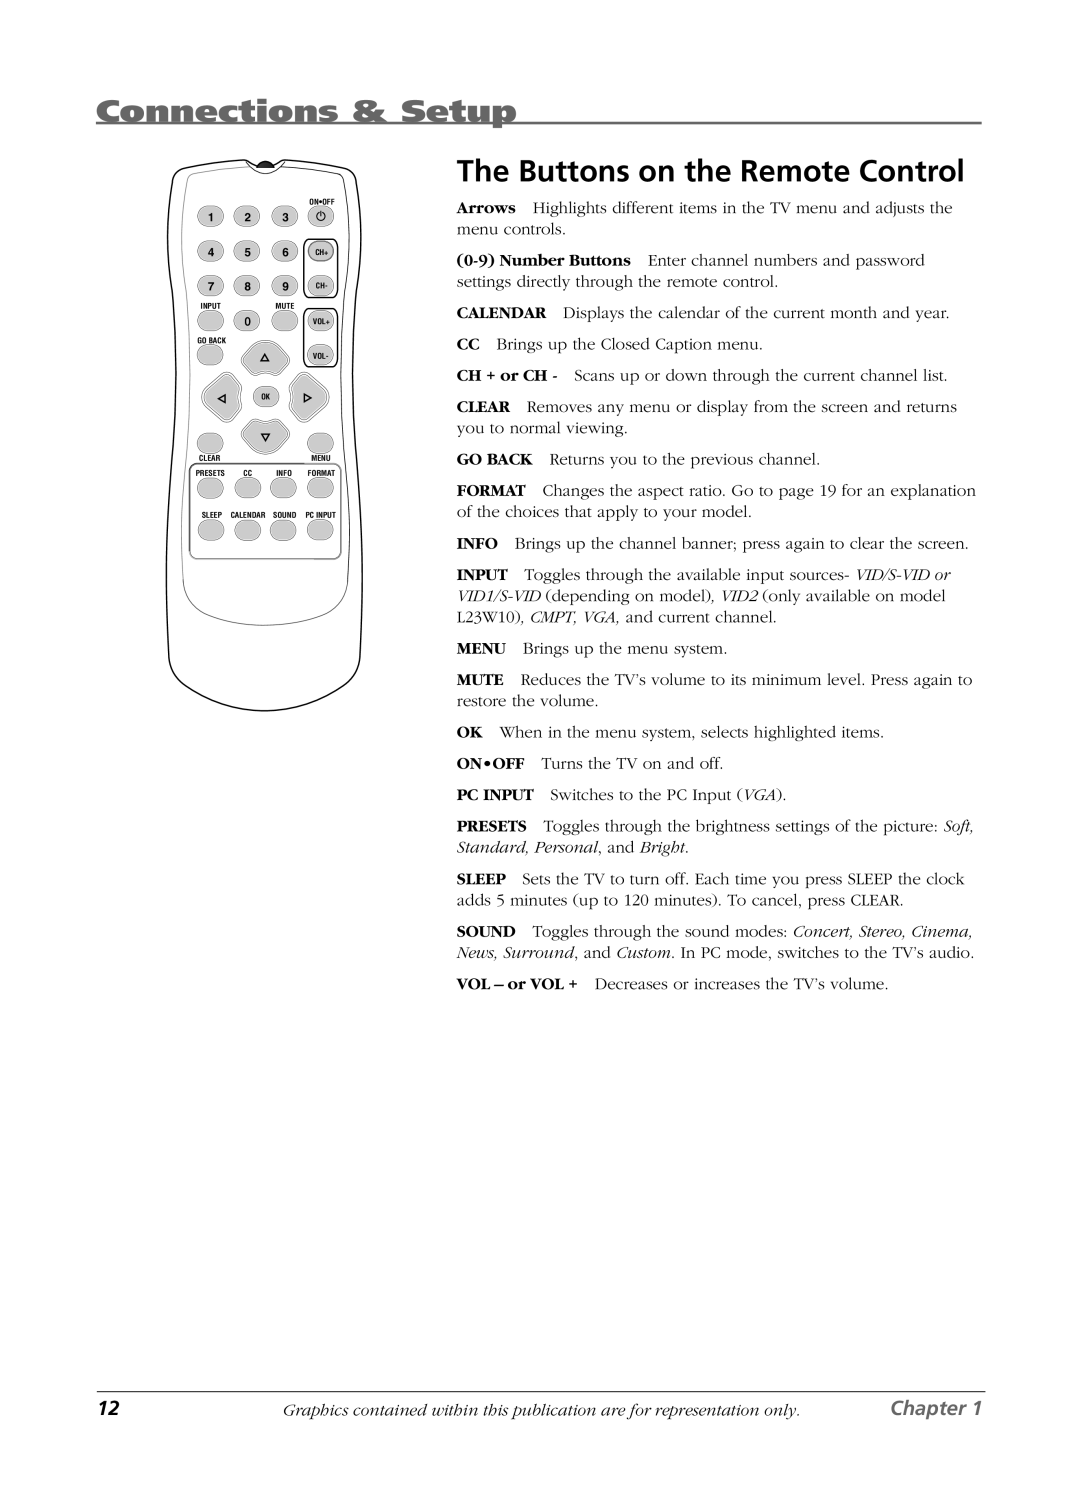 RCA L23W10, L2010, L1510 manual The Buttons on the Remote Control, Connections & Setup, Chapter 